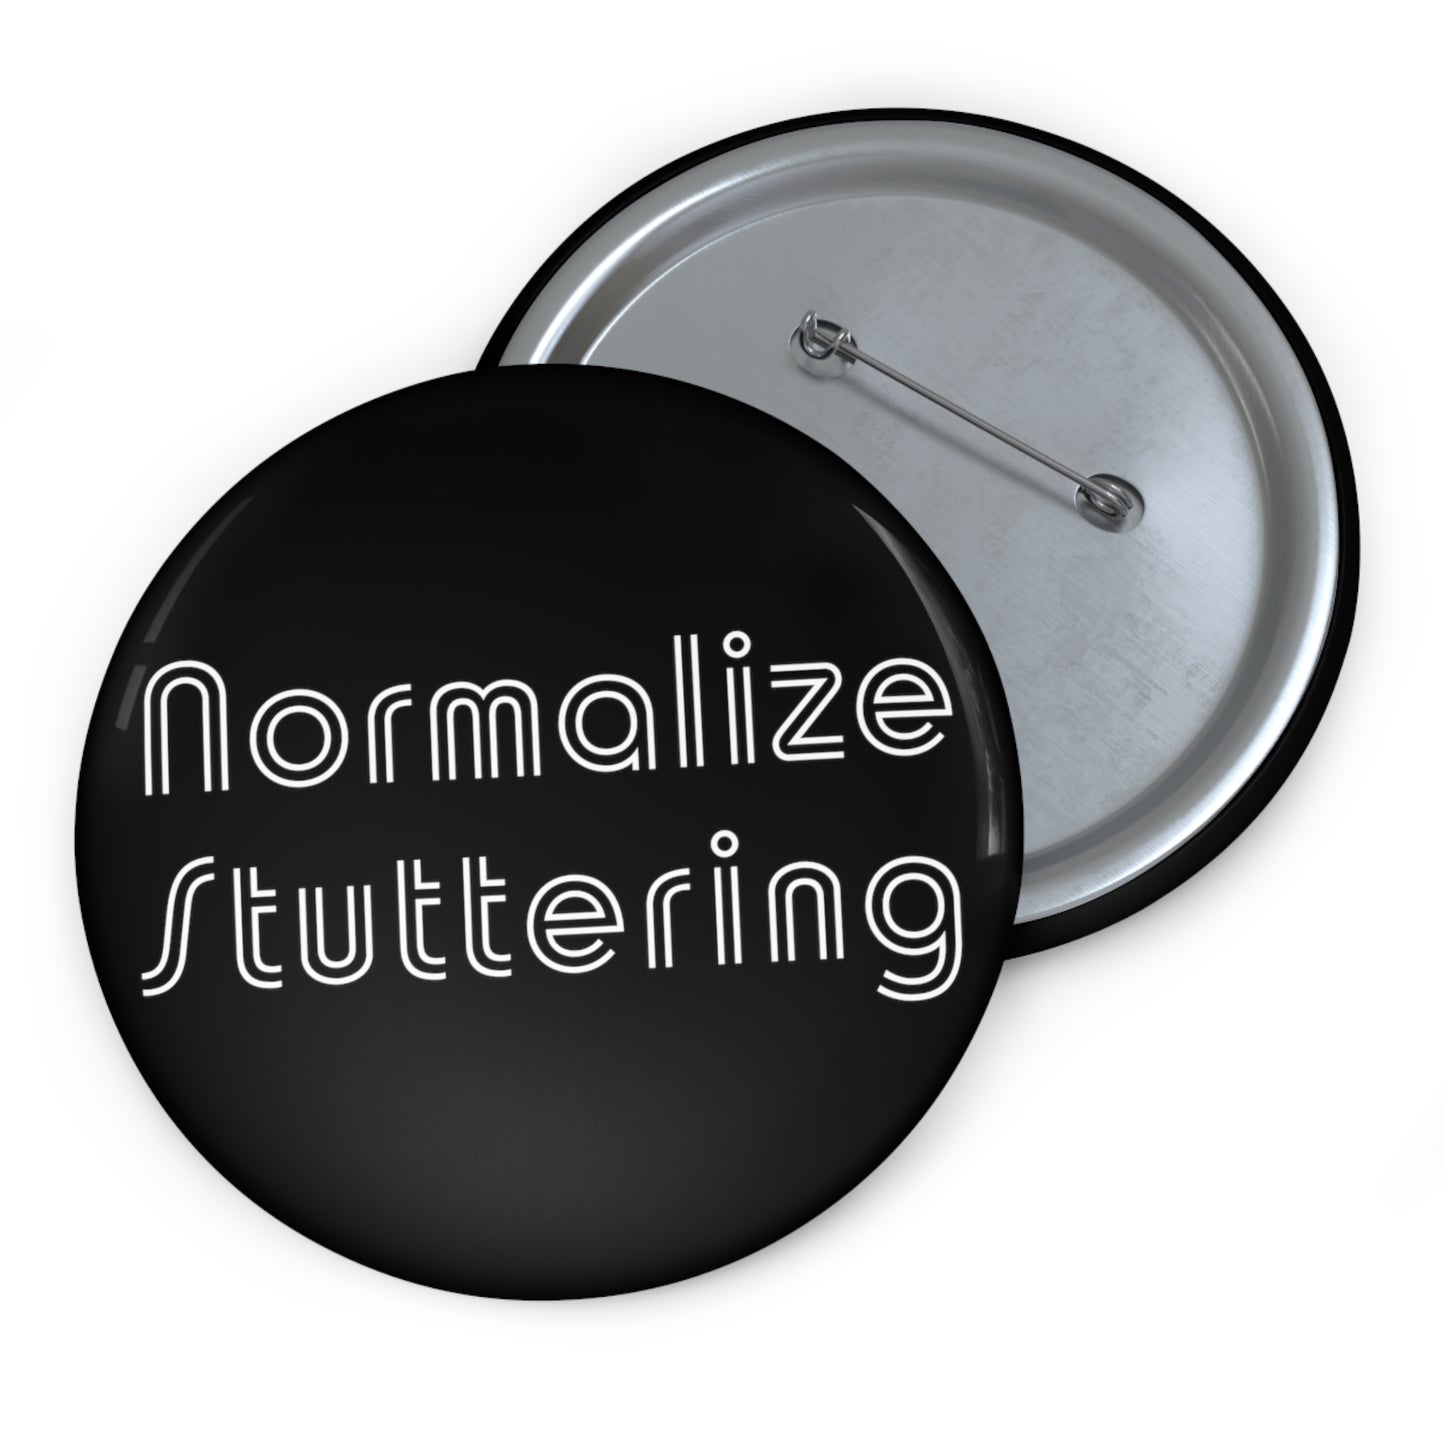 Normalize Stuttering Retro Pin Button 1.25" 2.25" or 3"